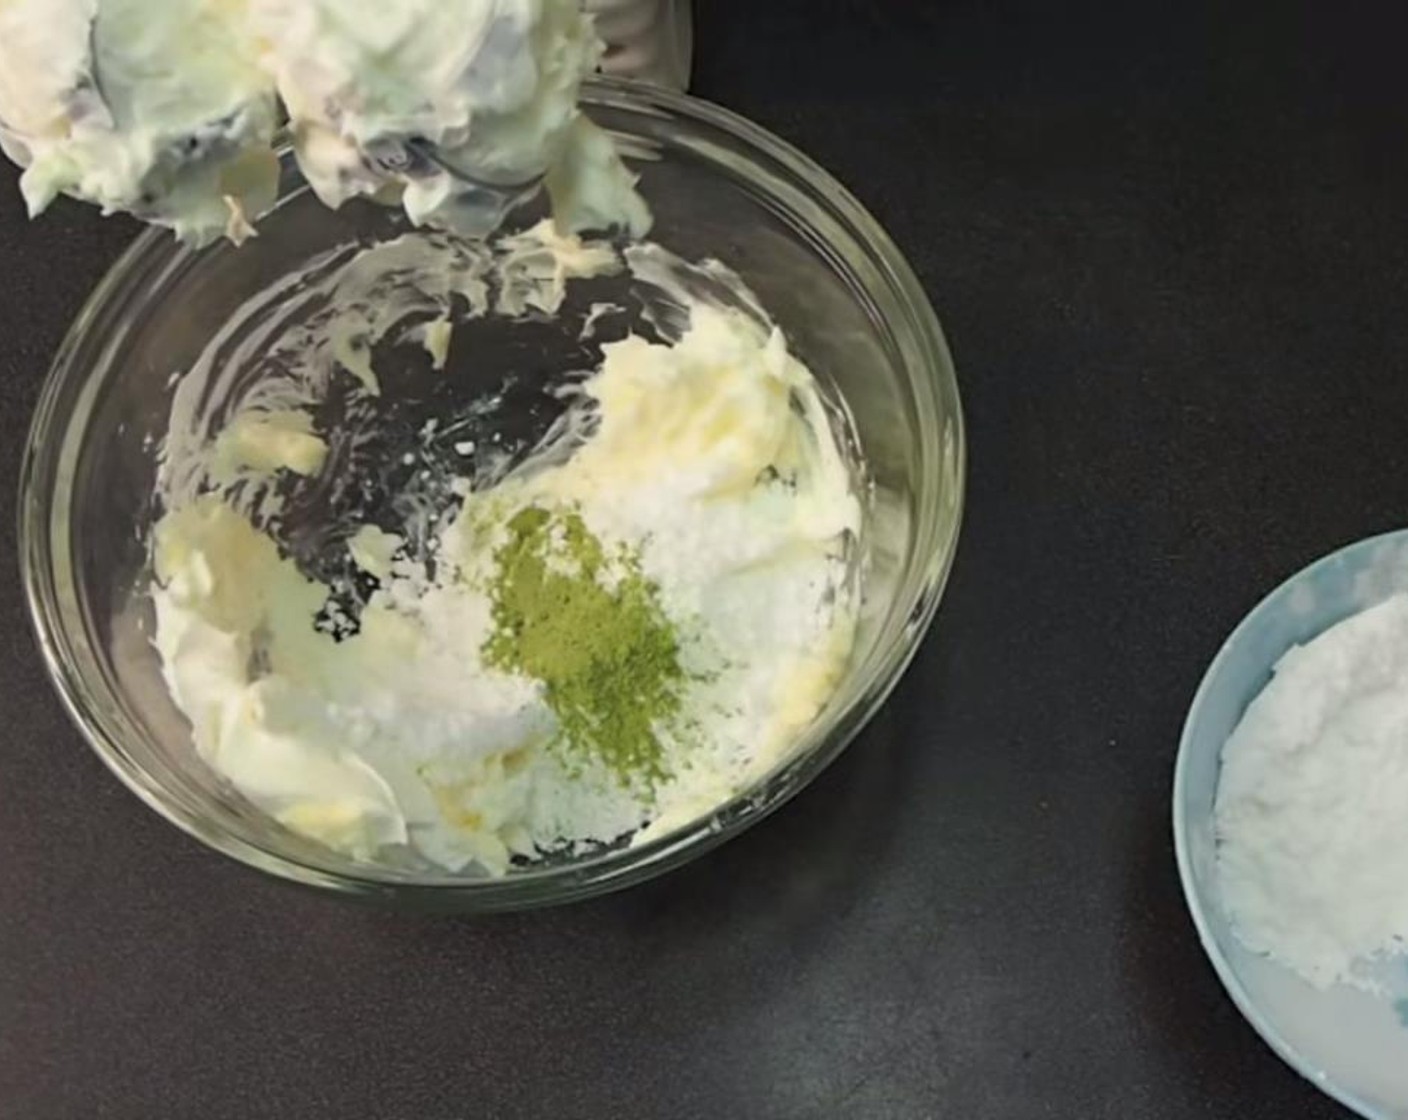 step 10 To create the filling, cream Matcha Powder (1 Tbsp), room temperature Cream Cheese (1/2 cup), Vanilla Extract (1 tsp), and sifted Powdered Confectioners Sugar (1/2 cup) together.  Fill a piping bag with the cream filling.